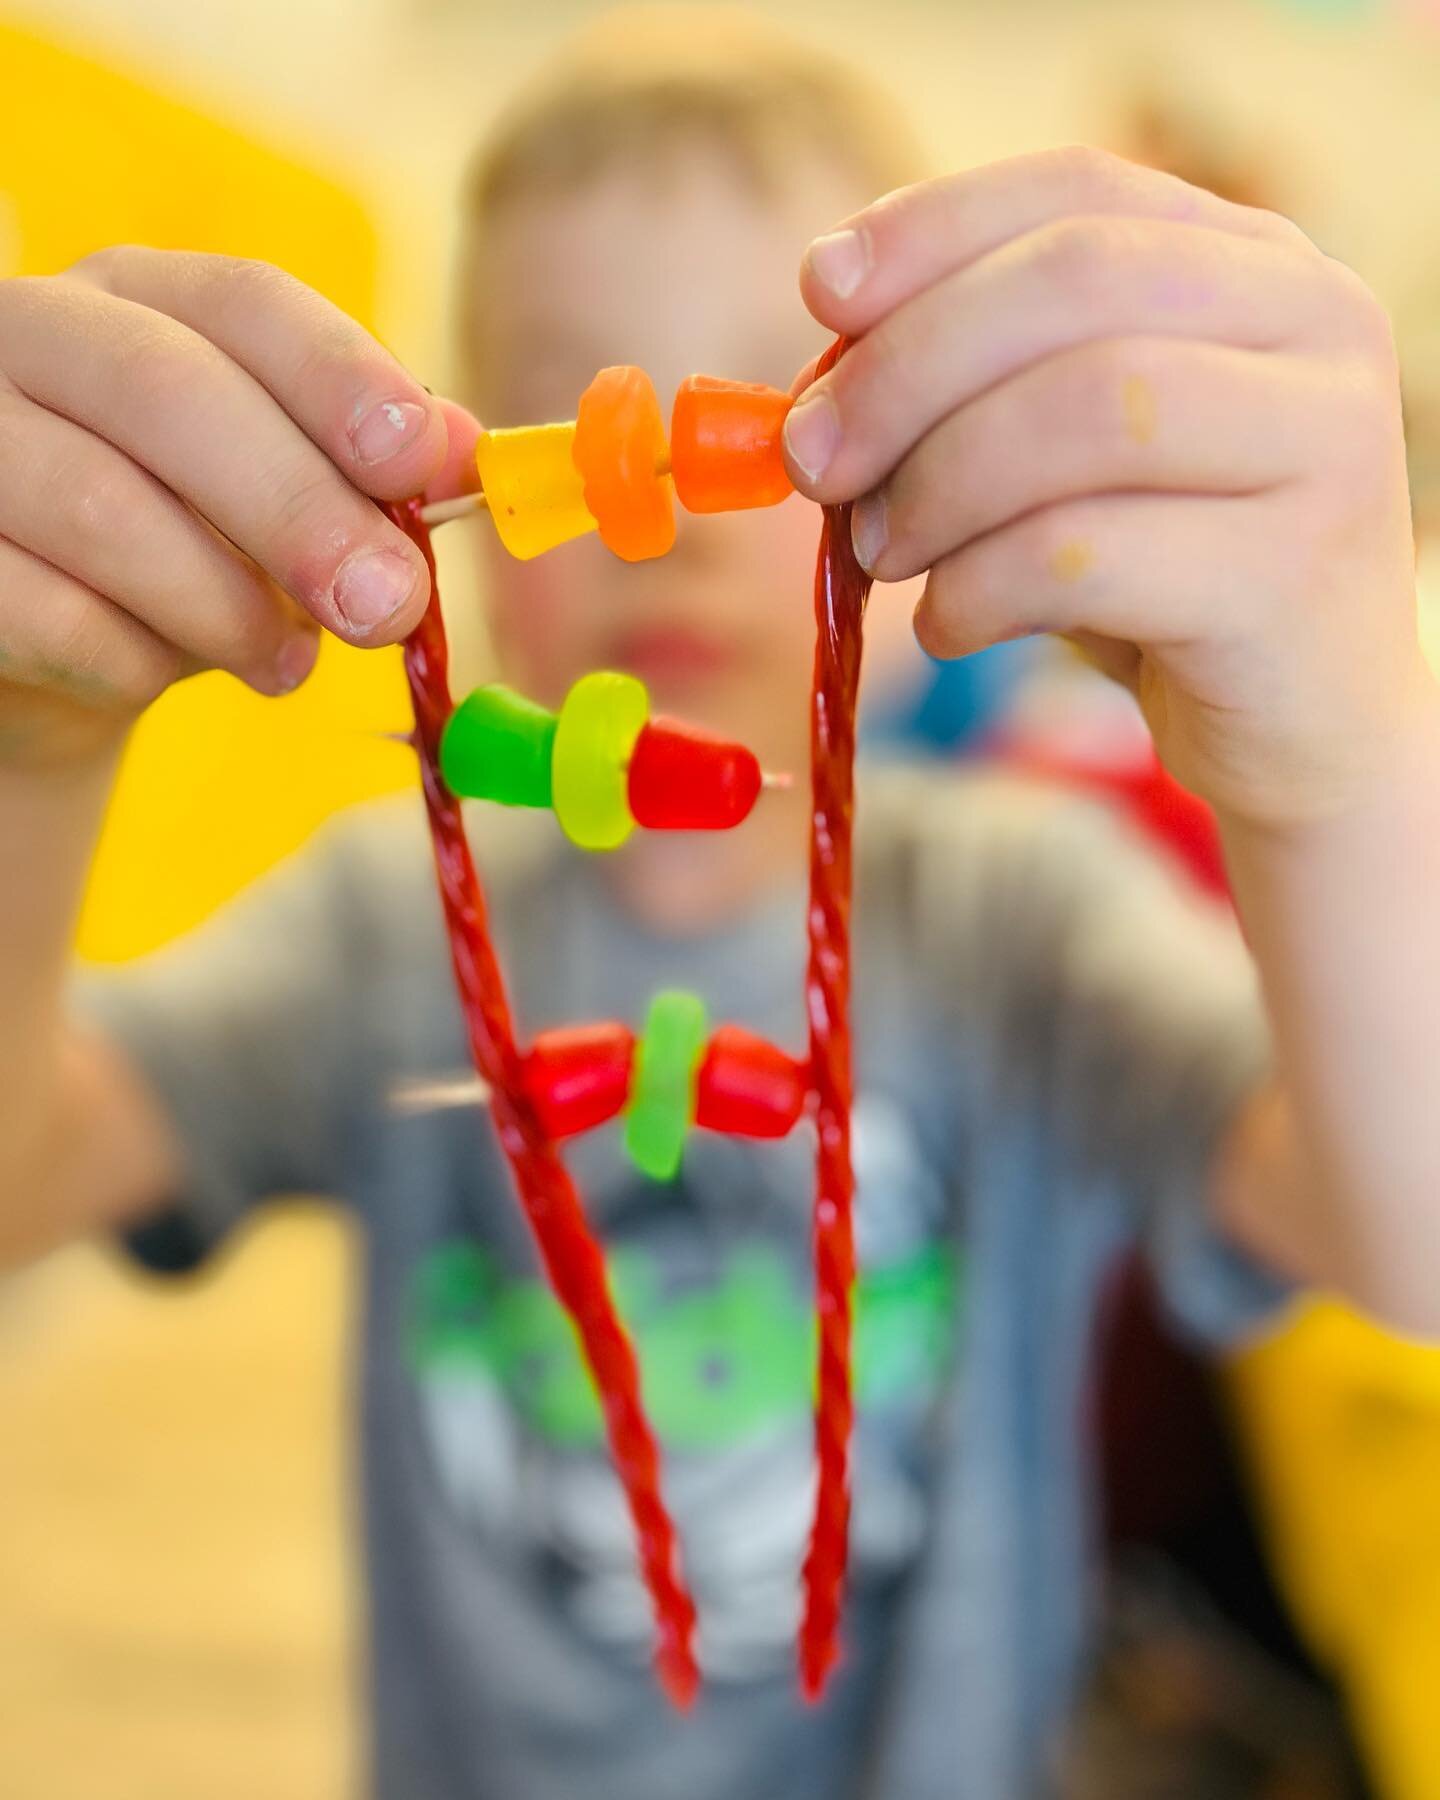 What do you need to make a candy DNA model? Licorice, gumdrops, gummy lifesavers and toothpicks. Science can be yummy! #ediblednamodel #candy #science #dna #kidsparty #birthdayparty #party #kidspartyideas #birthday #partyideas #partyplanner #kids #ar